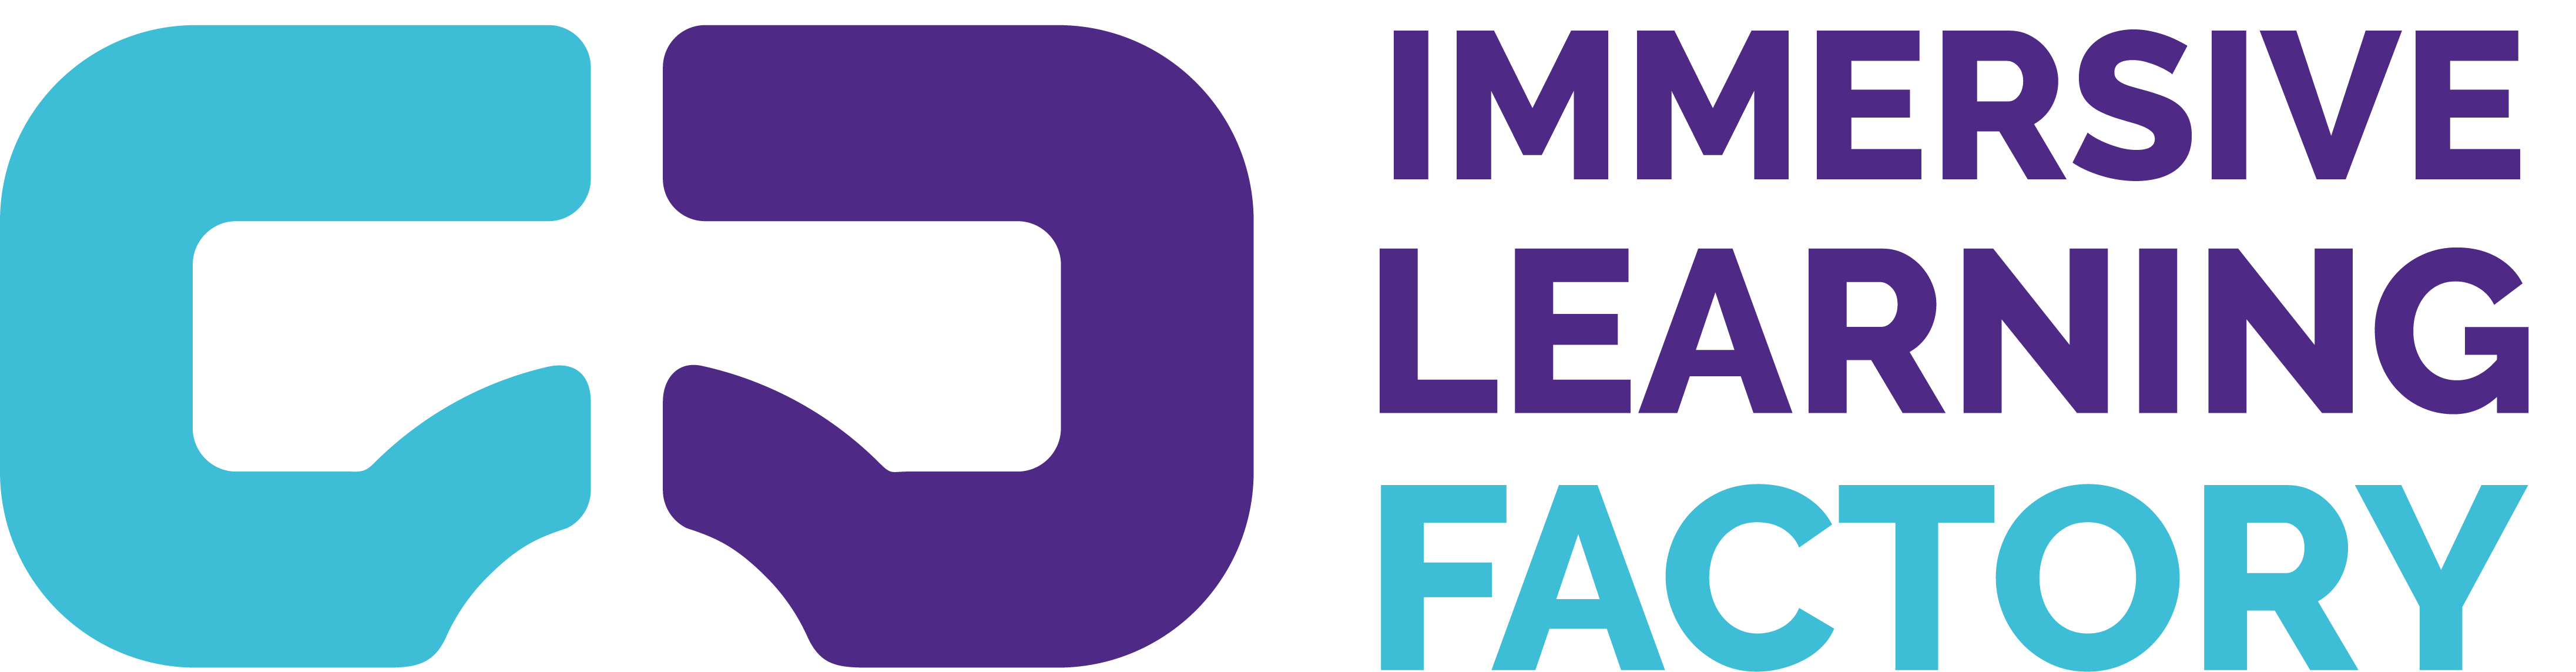 The Immersive Learning Factory